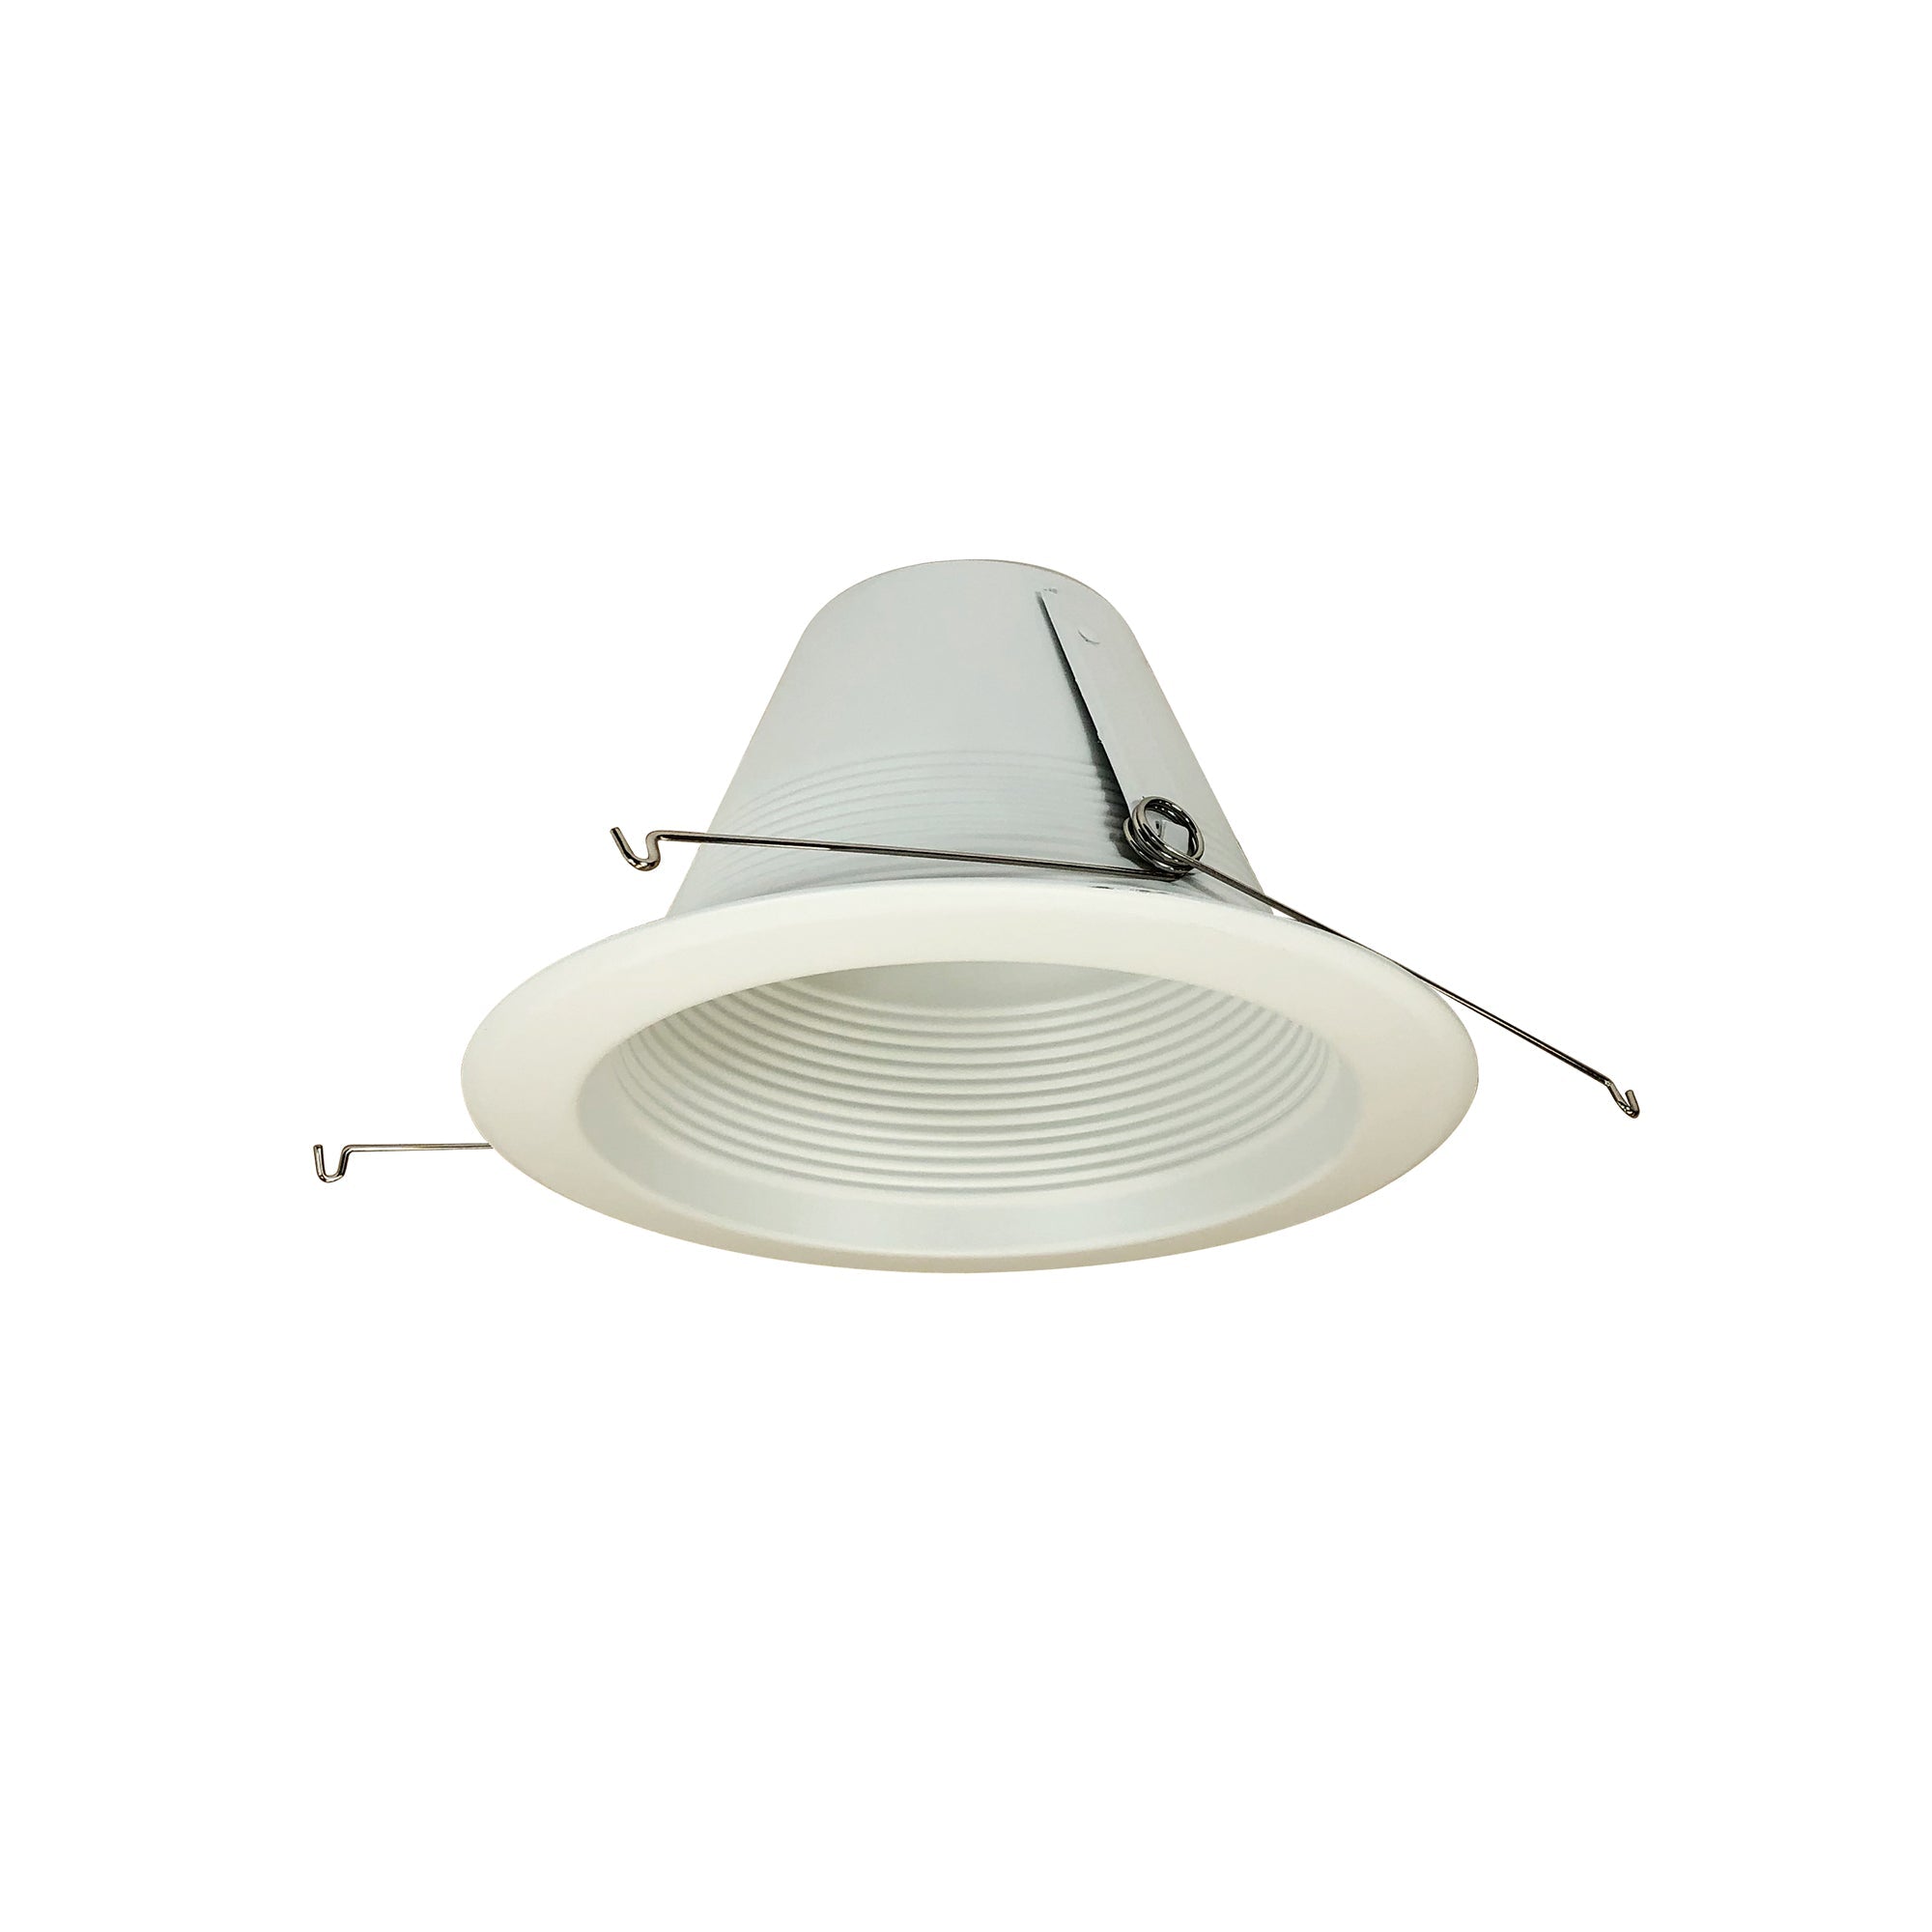 Nora Lighting NTM-716WAL - Recessed - 6 Inch Air-Tight Aluminum Shallow Baffle Cone, White